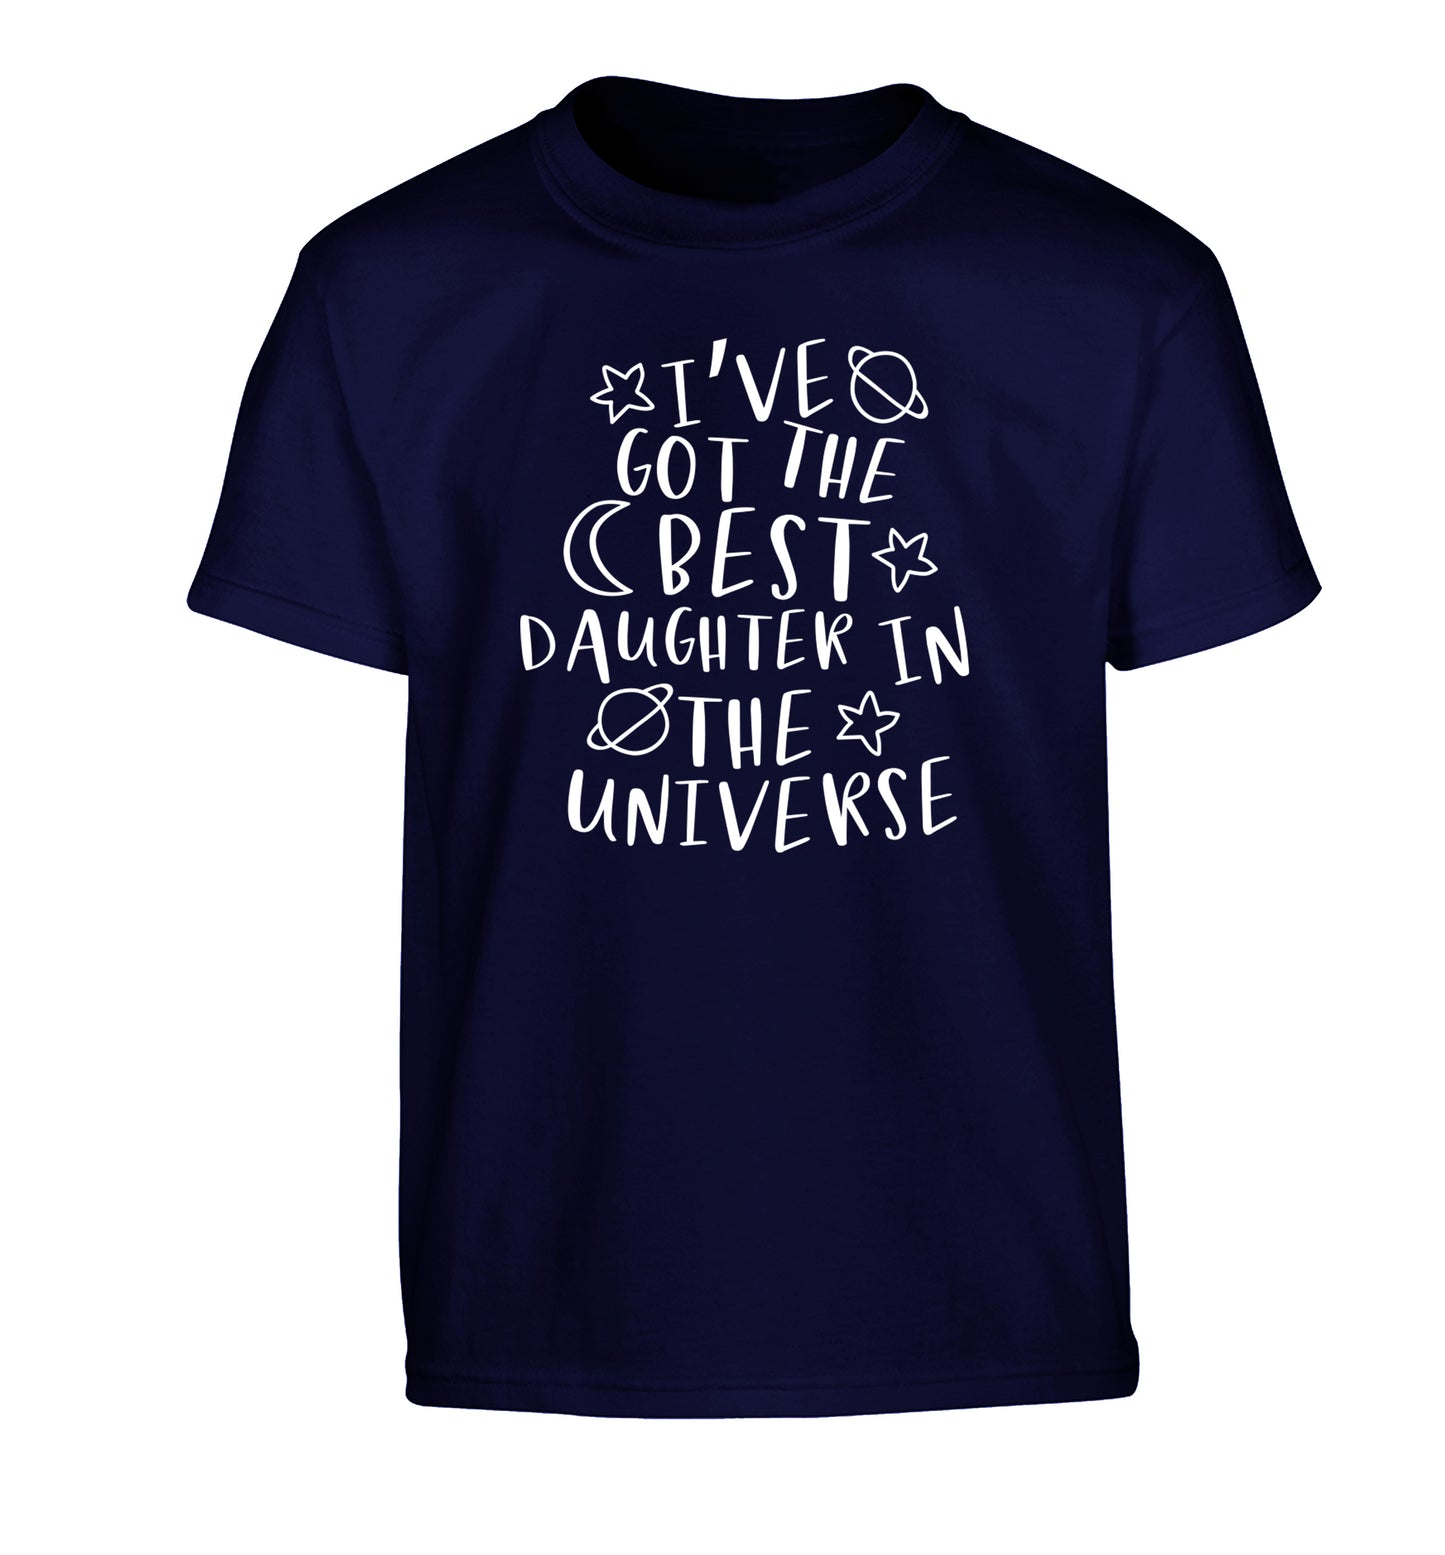 I've got the best daughter in the universe Children's navy Tshirt 12-13 Years